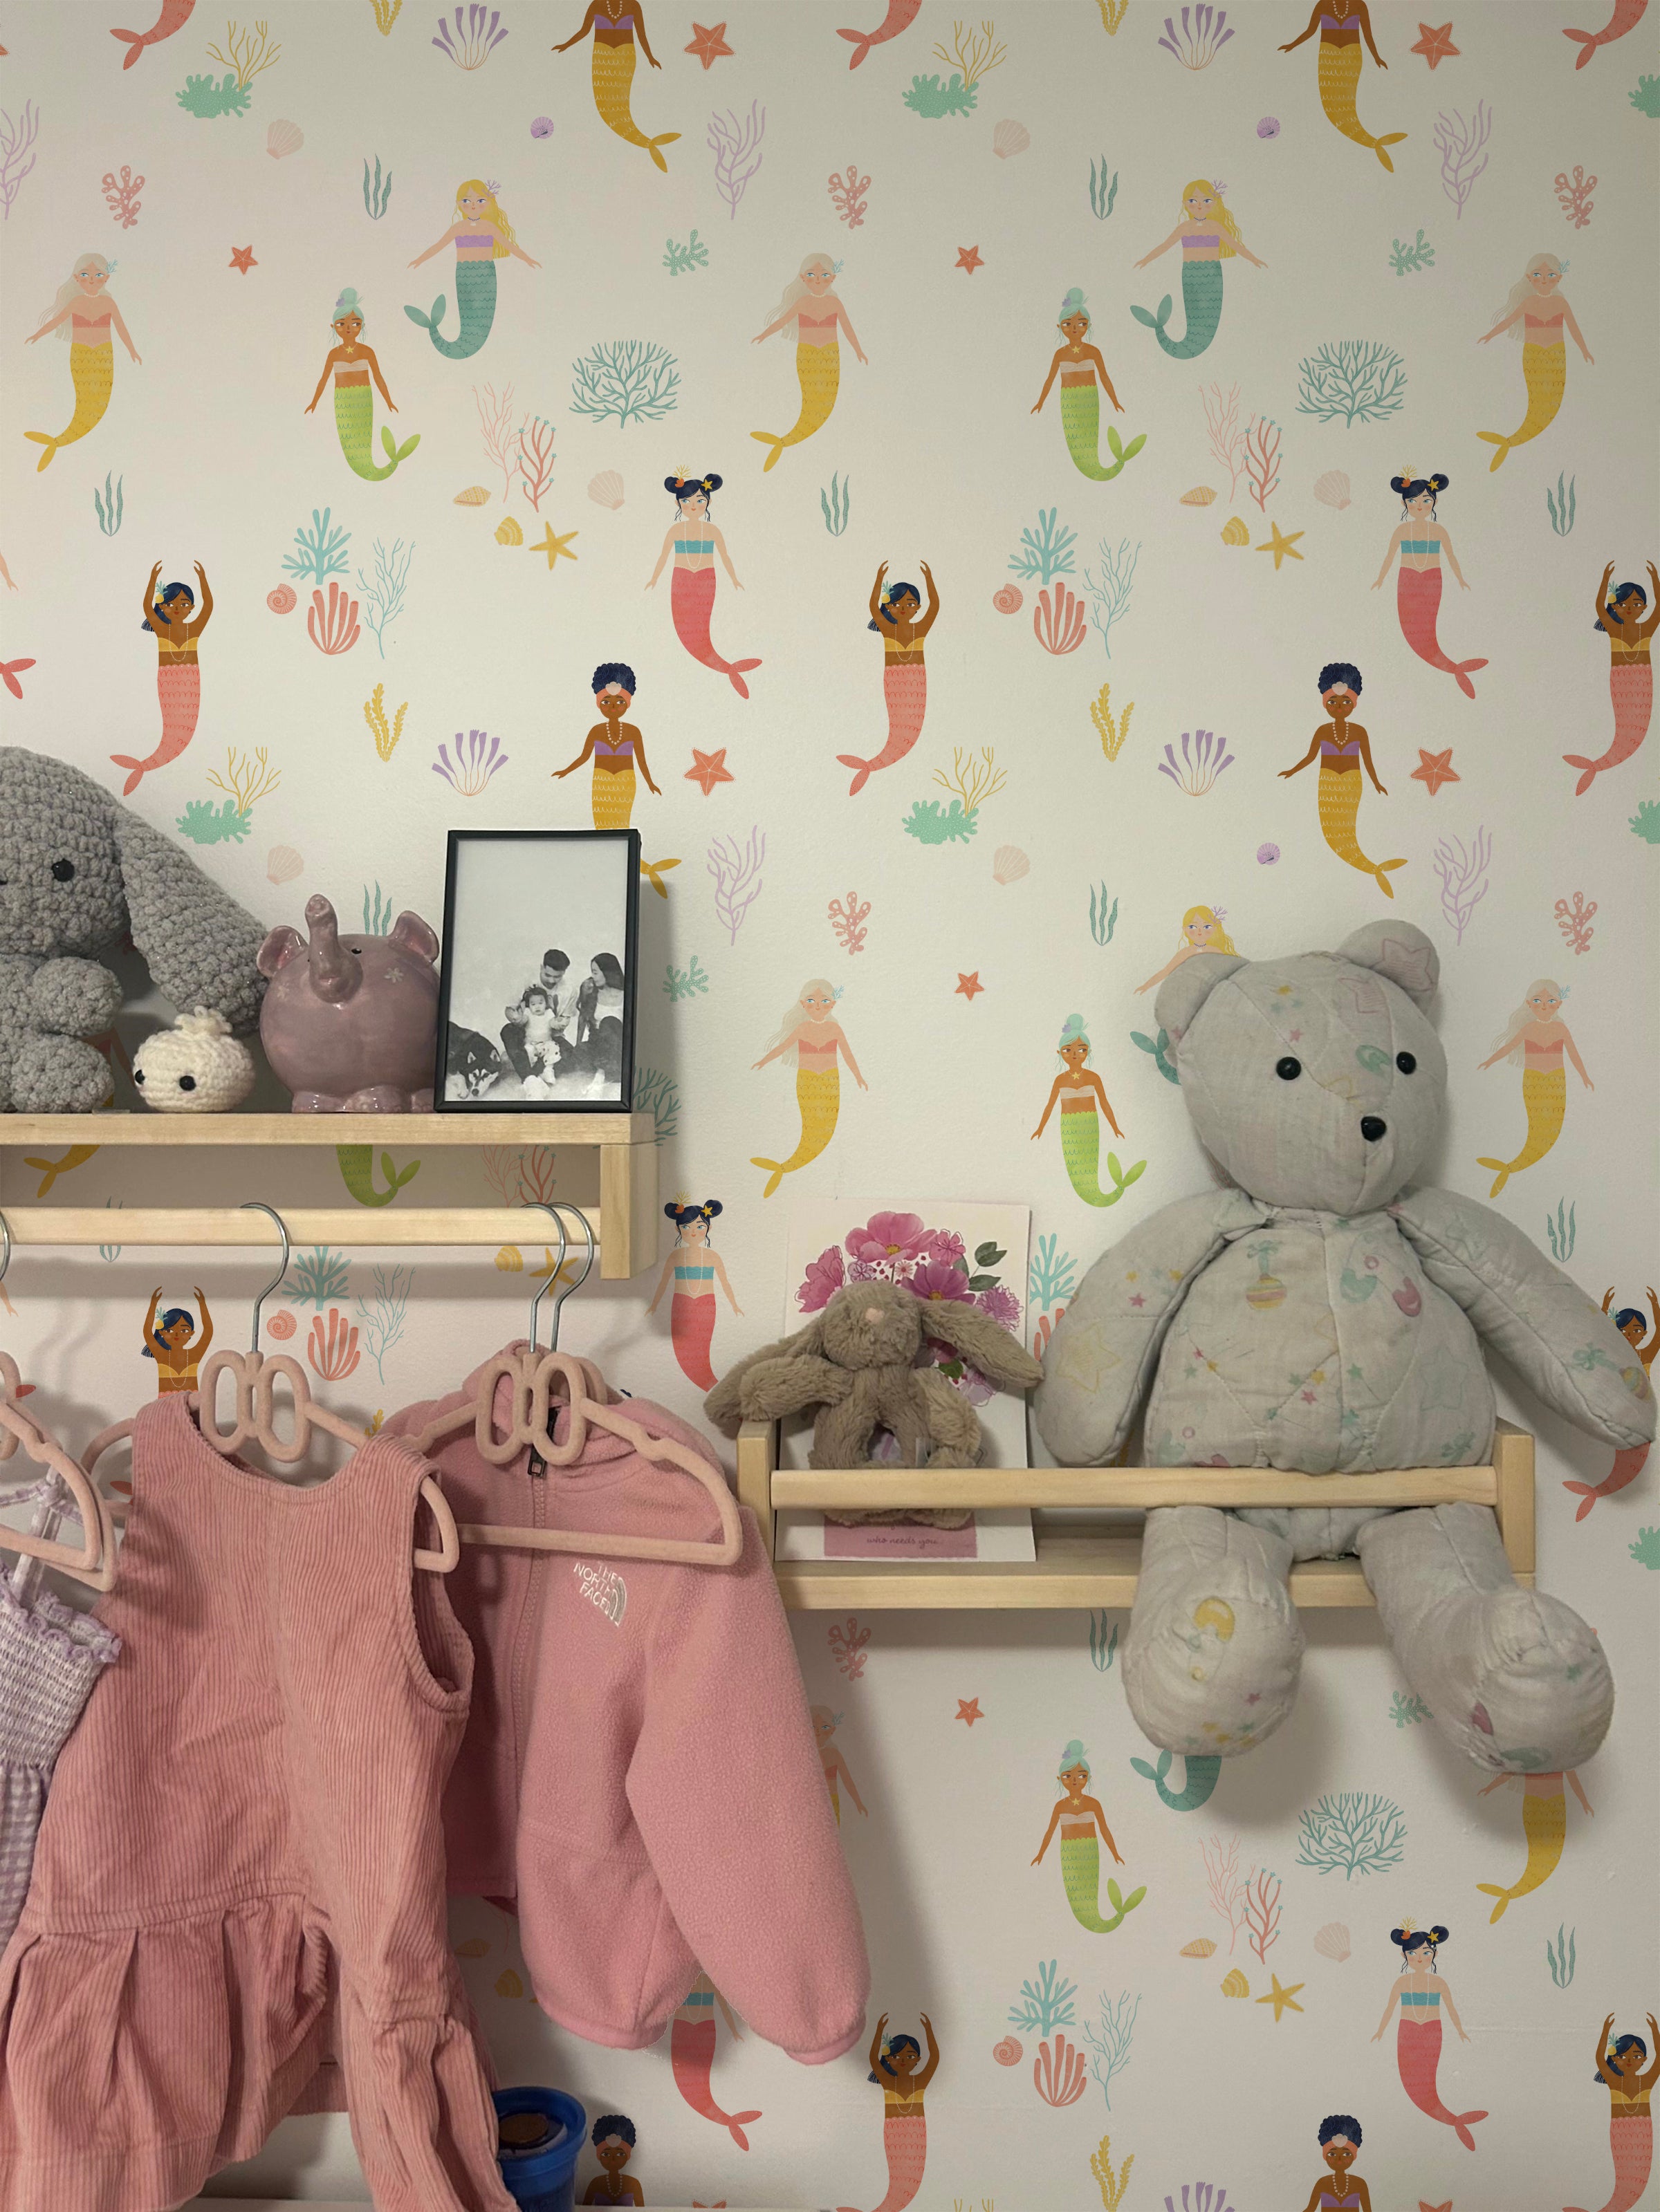 A charming children's room decorated with Little Mermaids Wallpaper, featuring playful mermaids in a variety of poses and colors, accompanied by marine flora and fauna on a light background. The scene includes a display shelf with plush toys and children's clothes, creating a whimsical and joyful space.